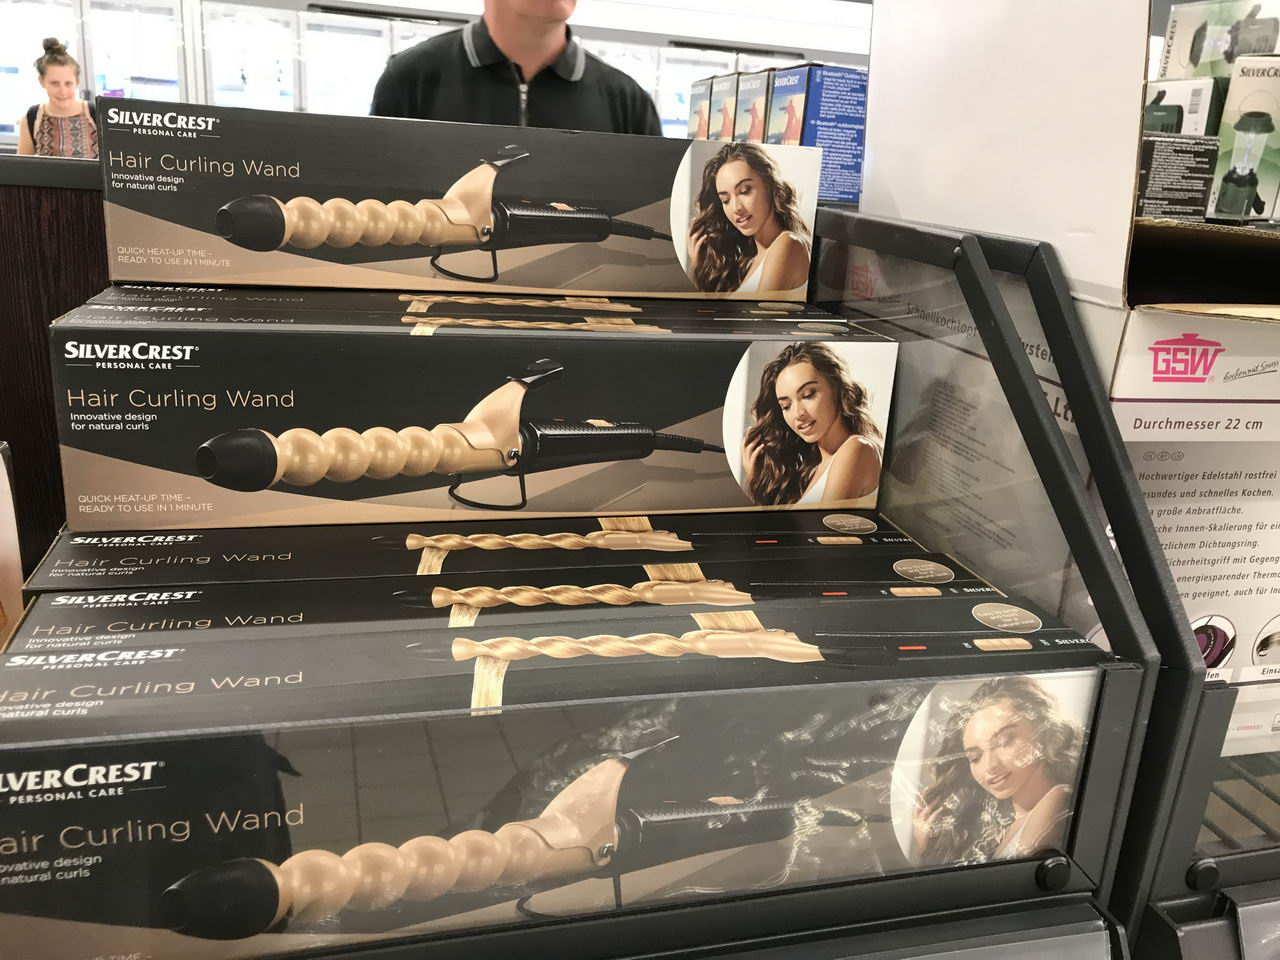 funny picture of hair curling wand product that looks like it might have other uses